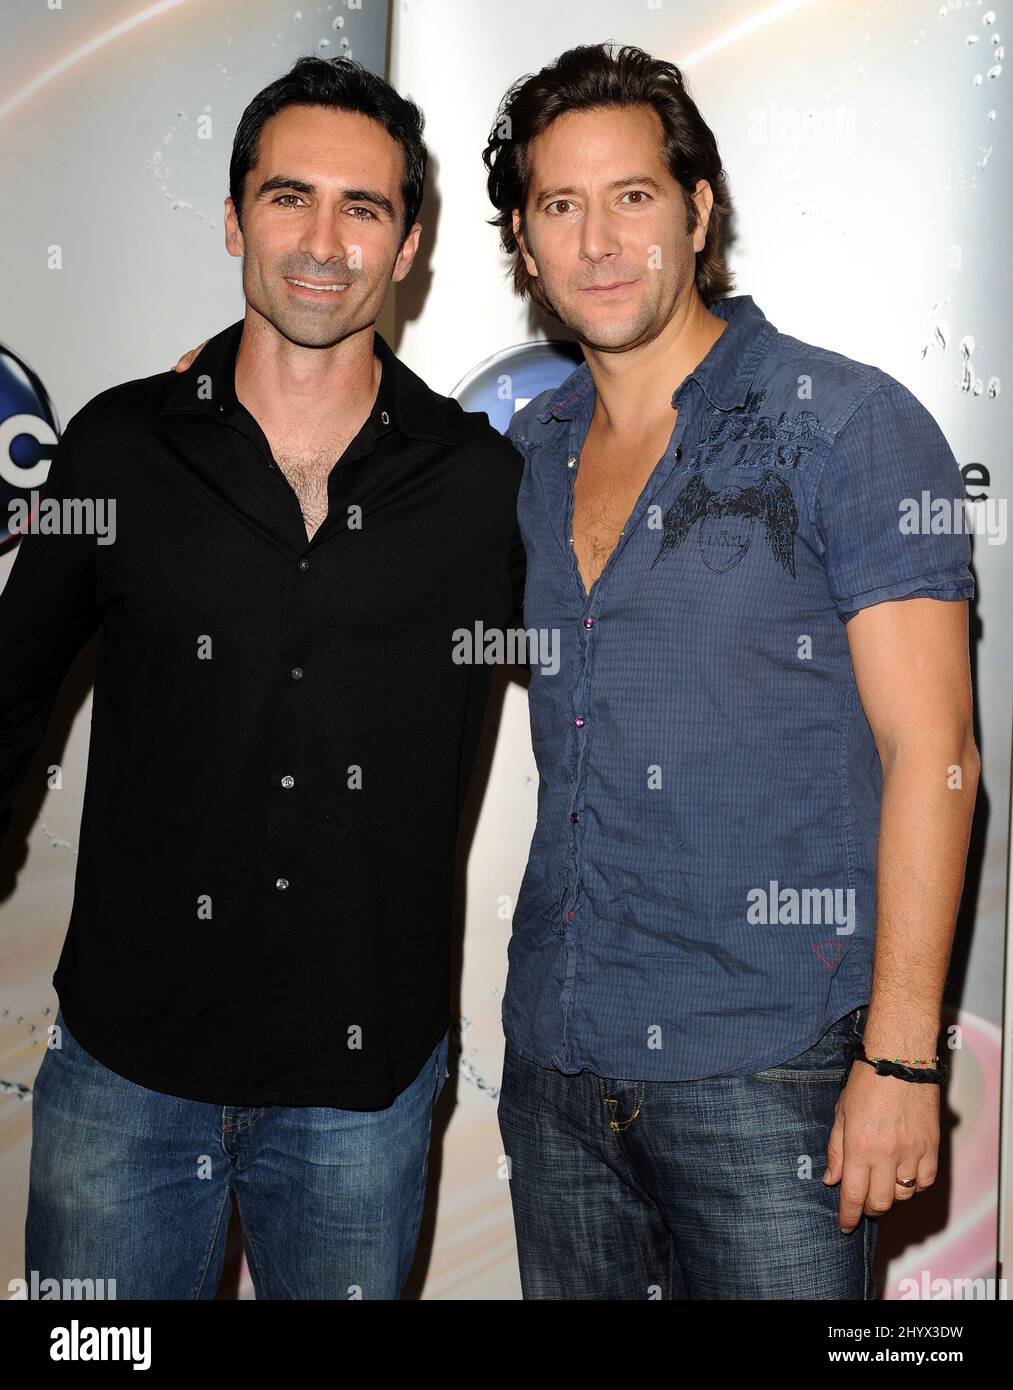 Nestor Carbonell and Henry Ian Cusick at Disney ABC Television Group Summer Press Junket held at ABC Studios in Burbank, CA. Stock Photo